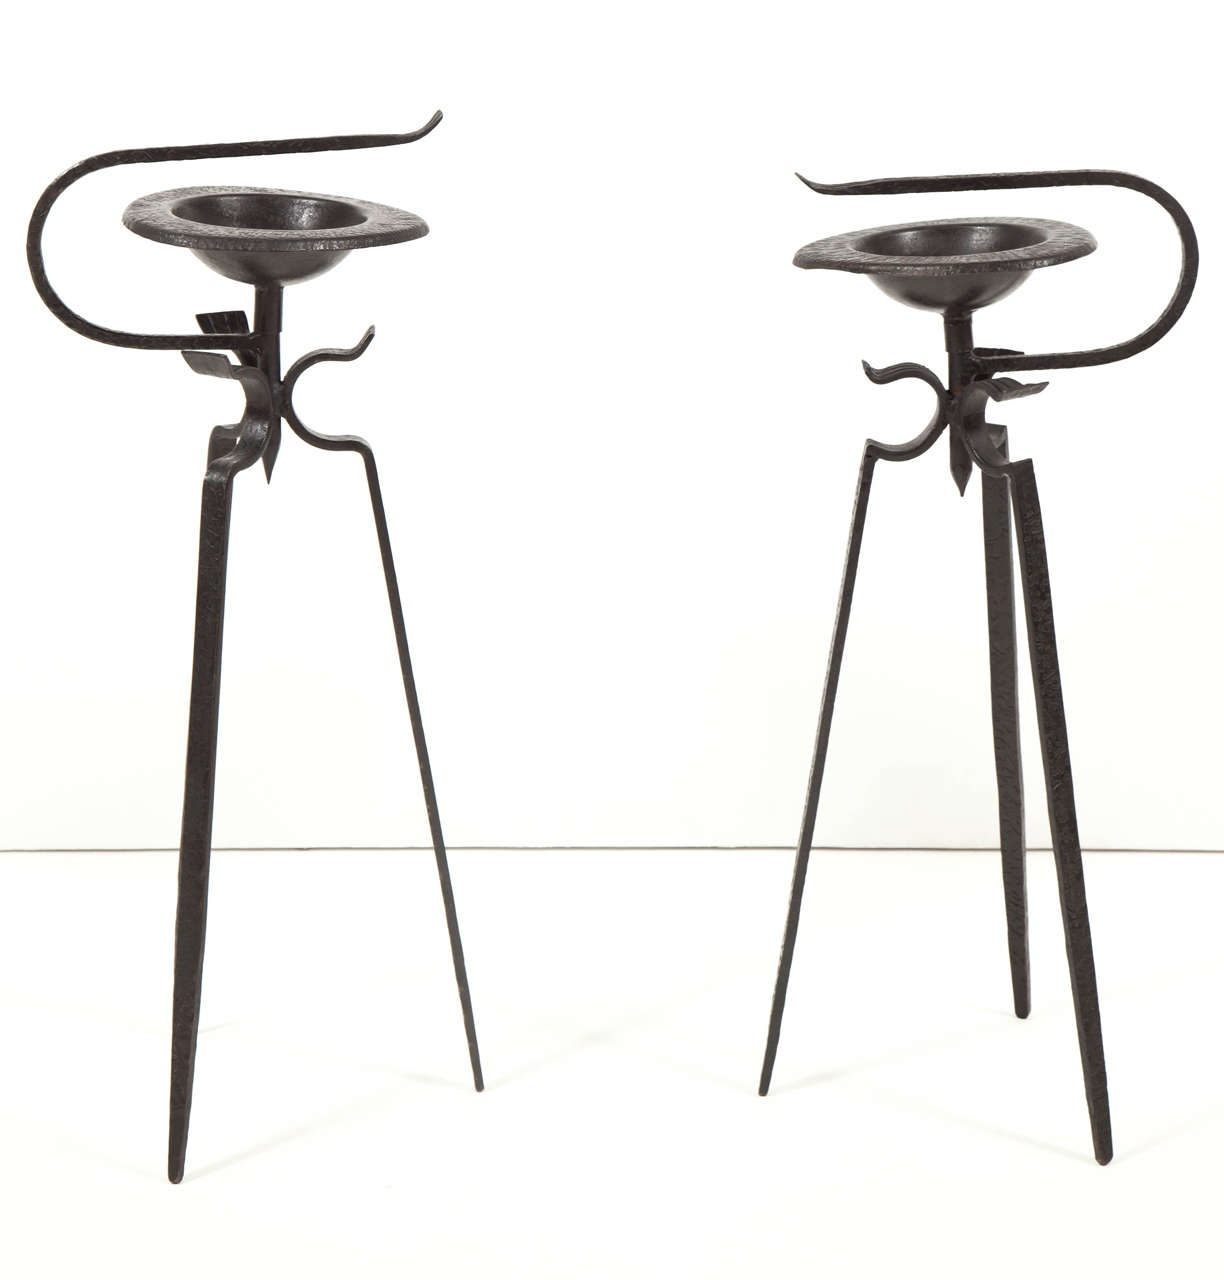 Mid-20th Century Hand-Forged French Smoking Stands